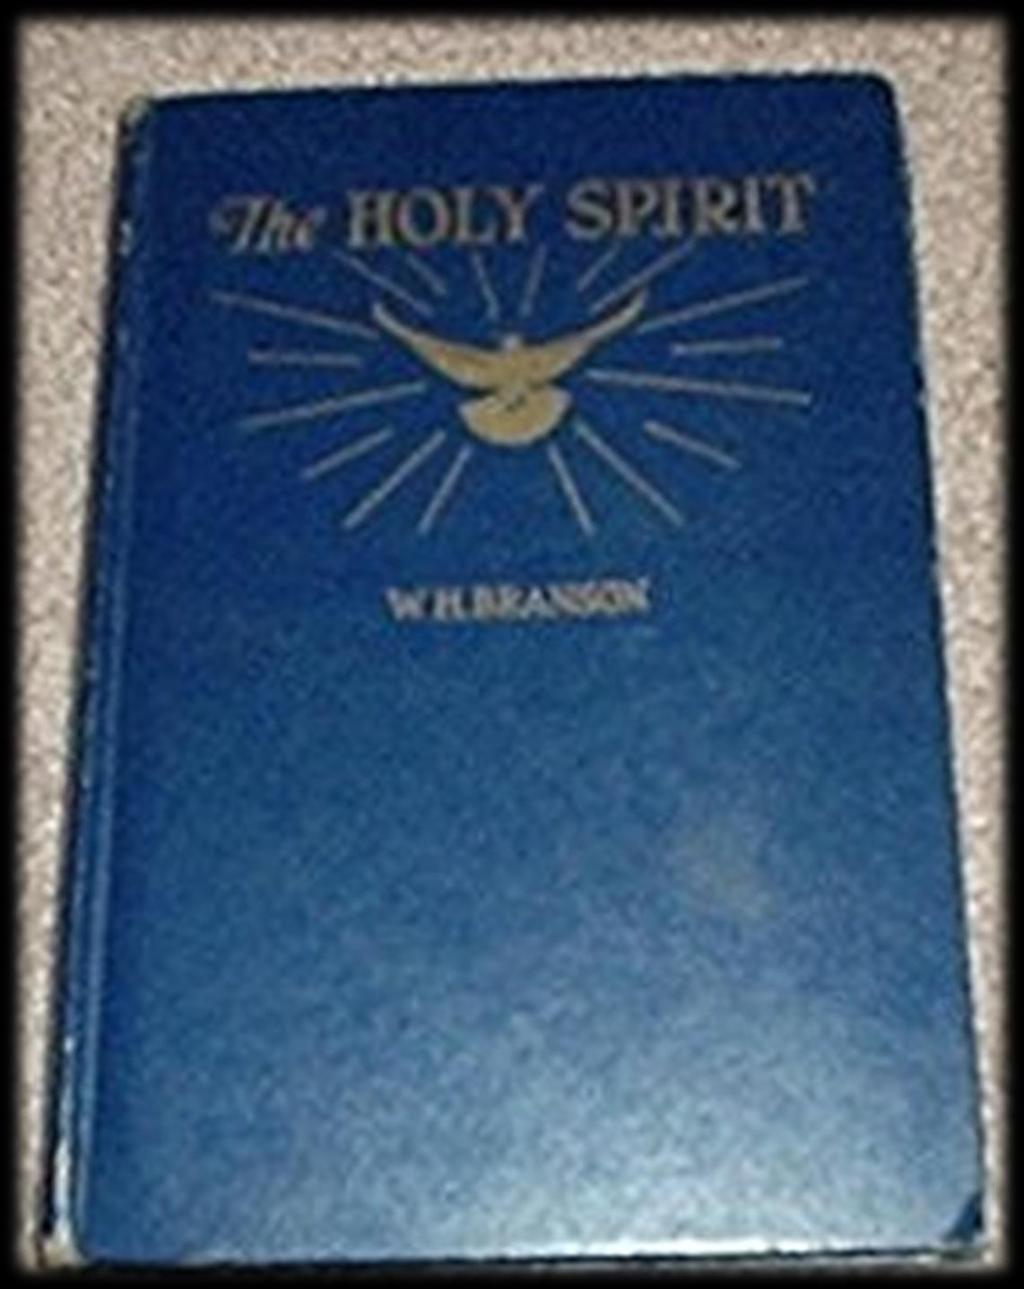 Book Review: The Holy Spirit Review and comments by